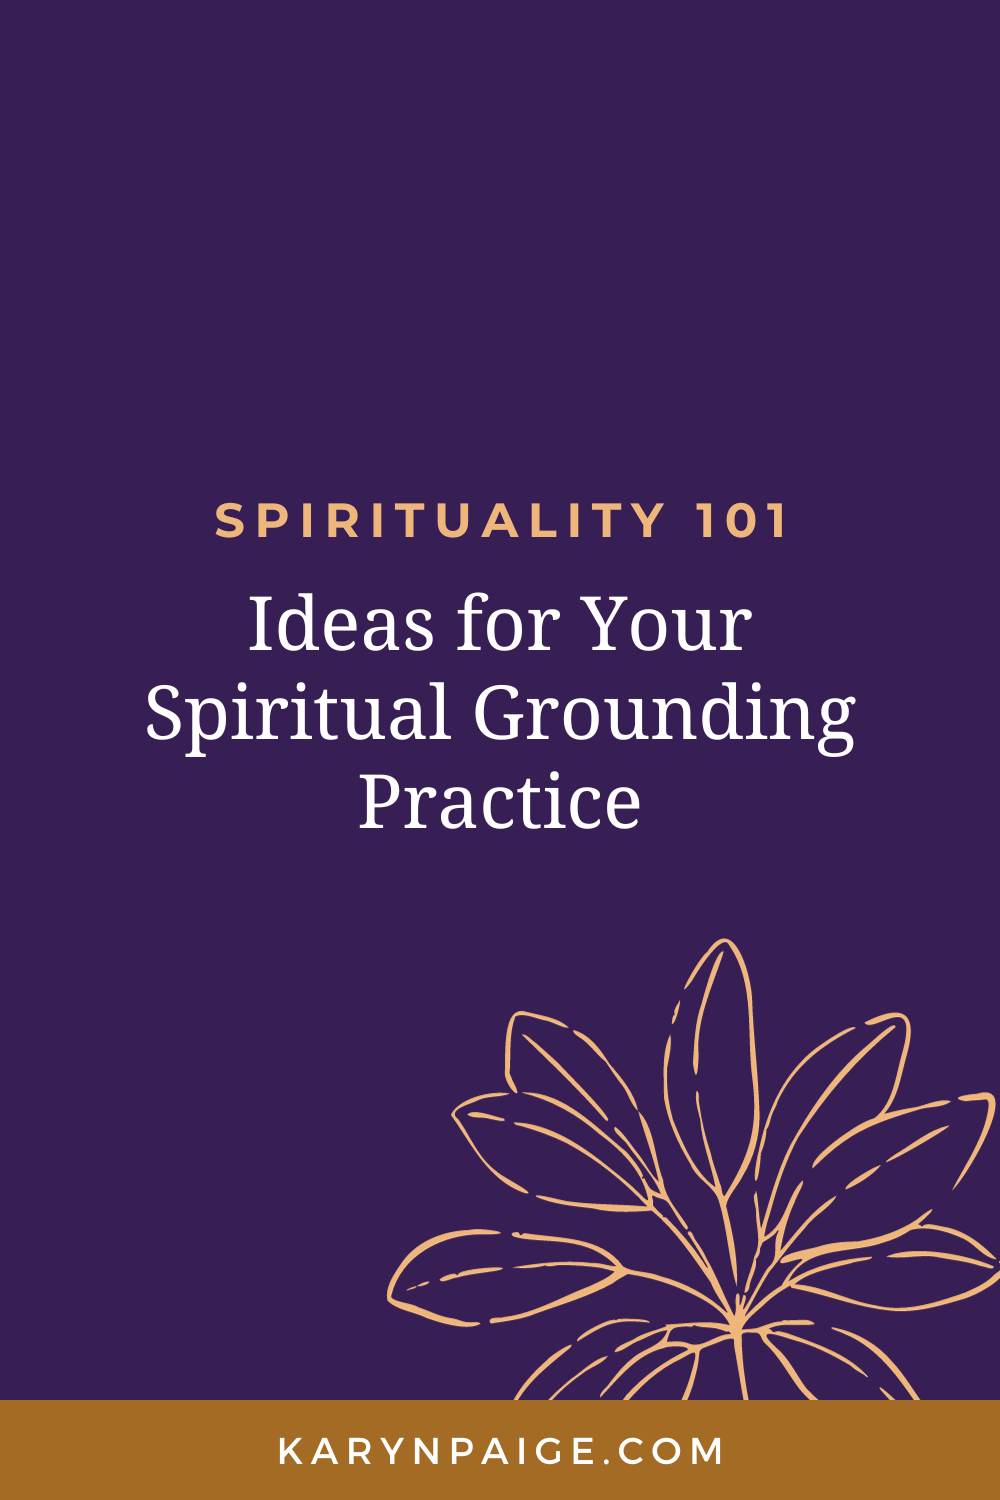 Support your spiritual journey with these simple ideas for spiritual grounding practice. By Karyn Paige, Human Design coach for Women of Color. www.karynpaige.com